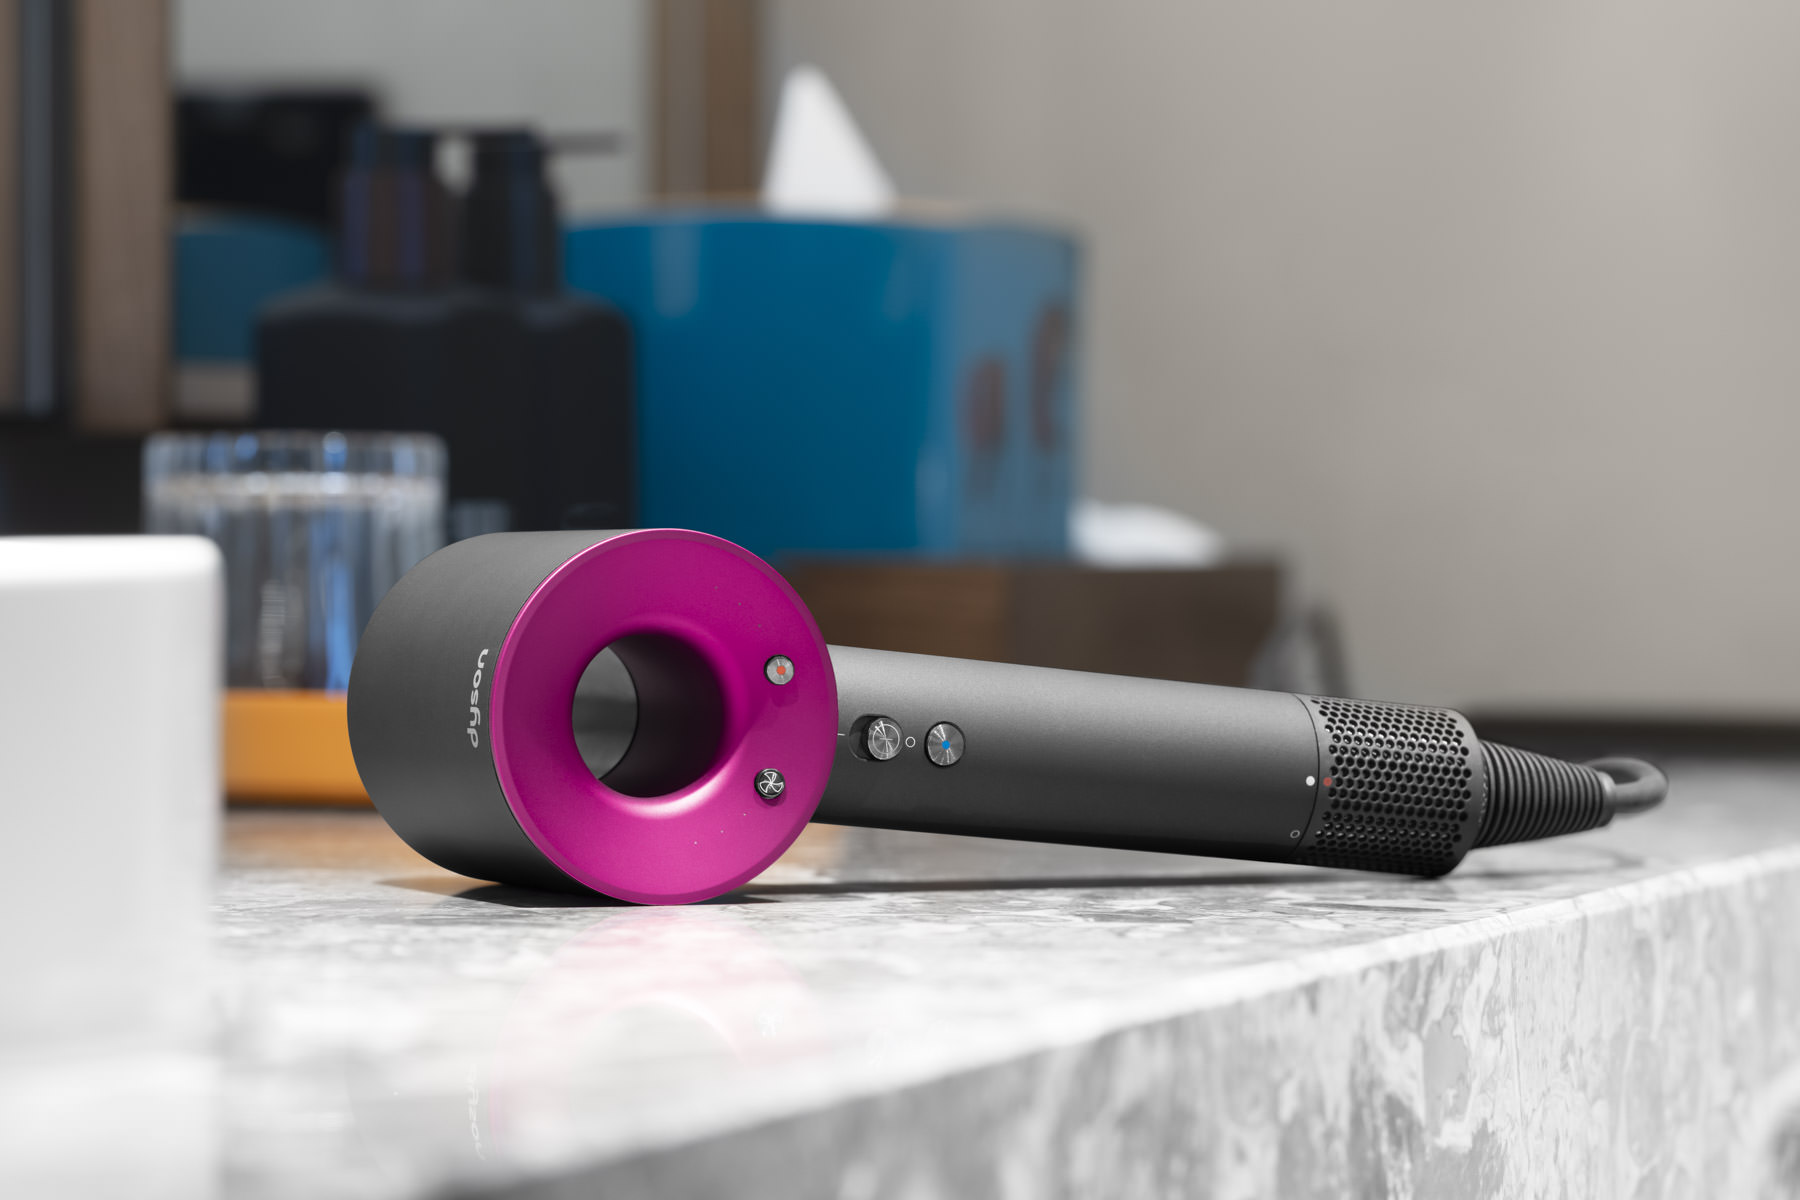 Product photography of a Dyson hairdryer